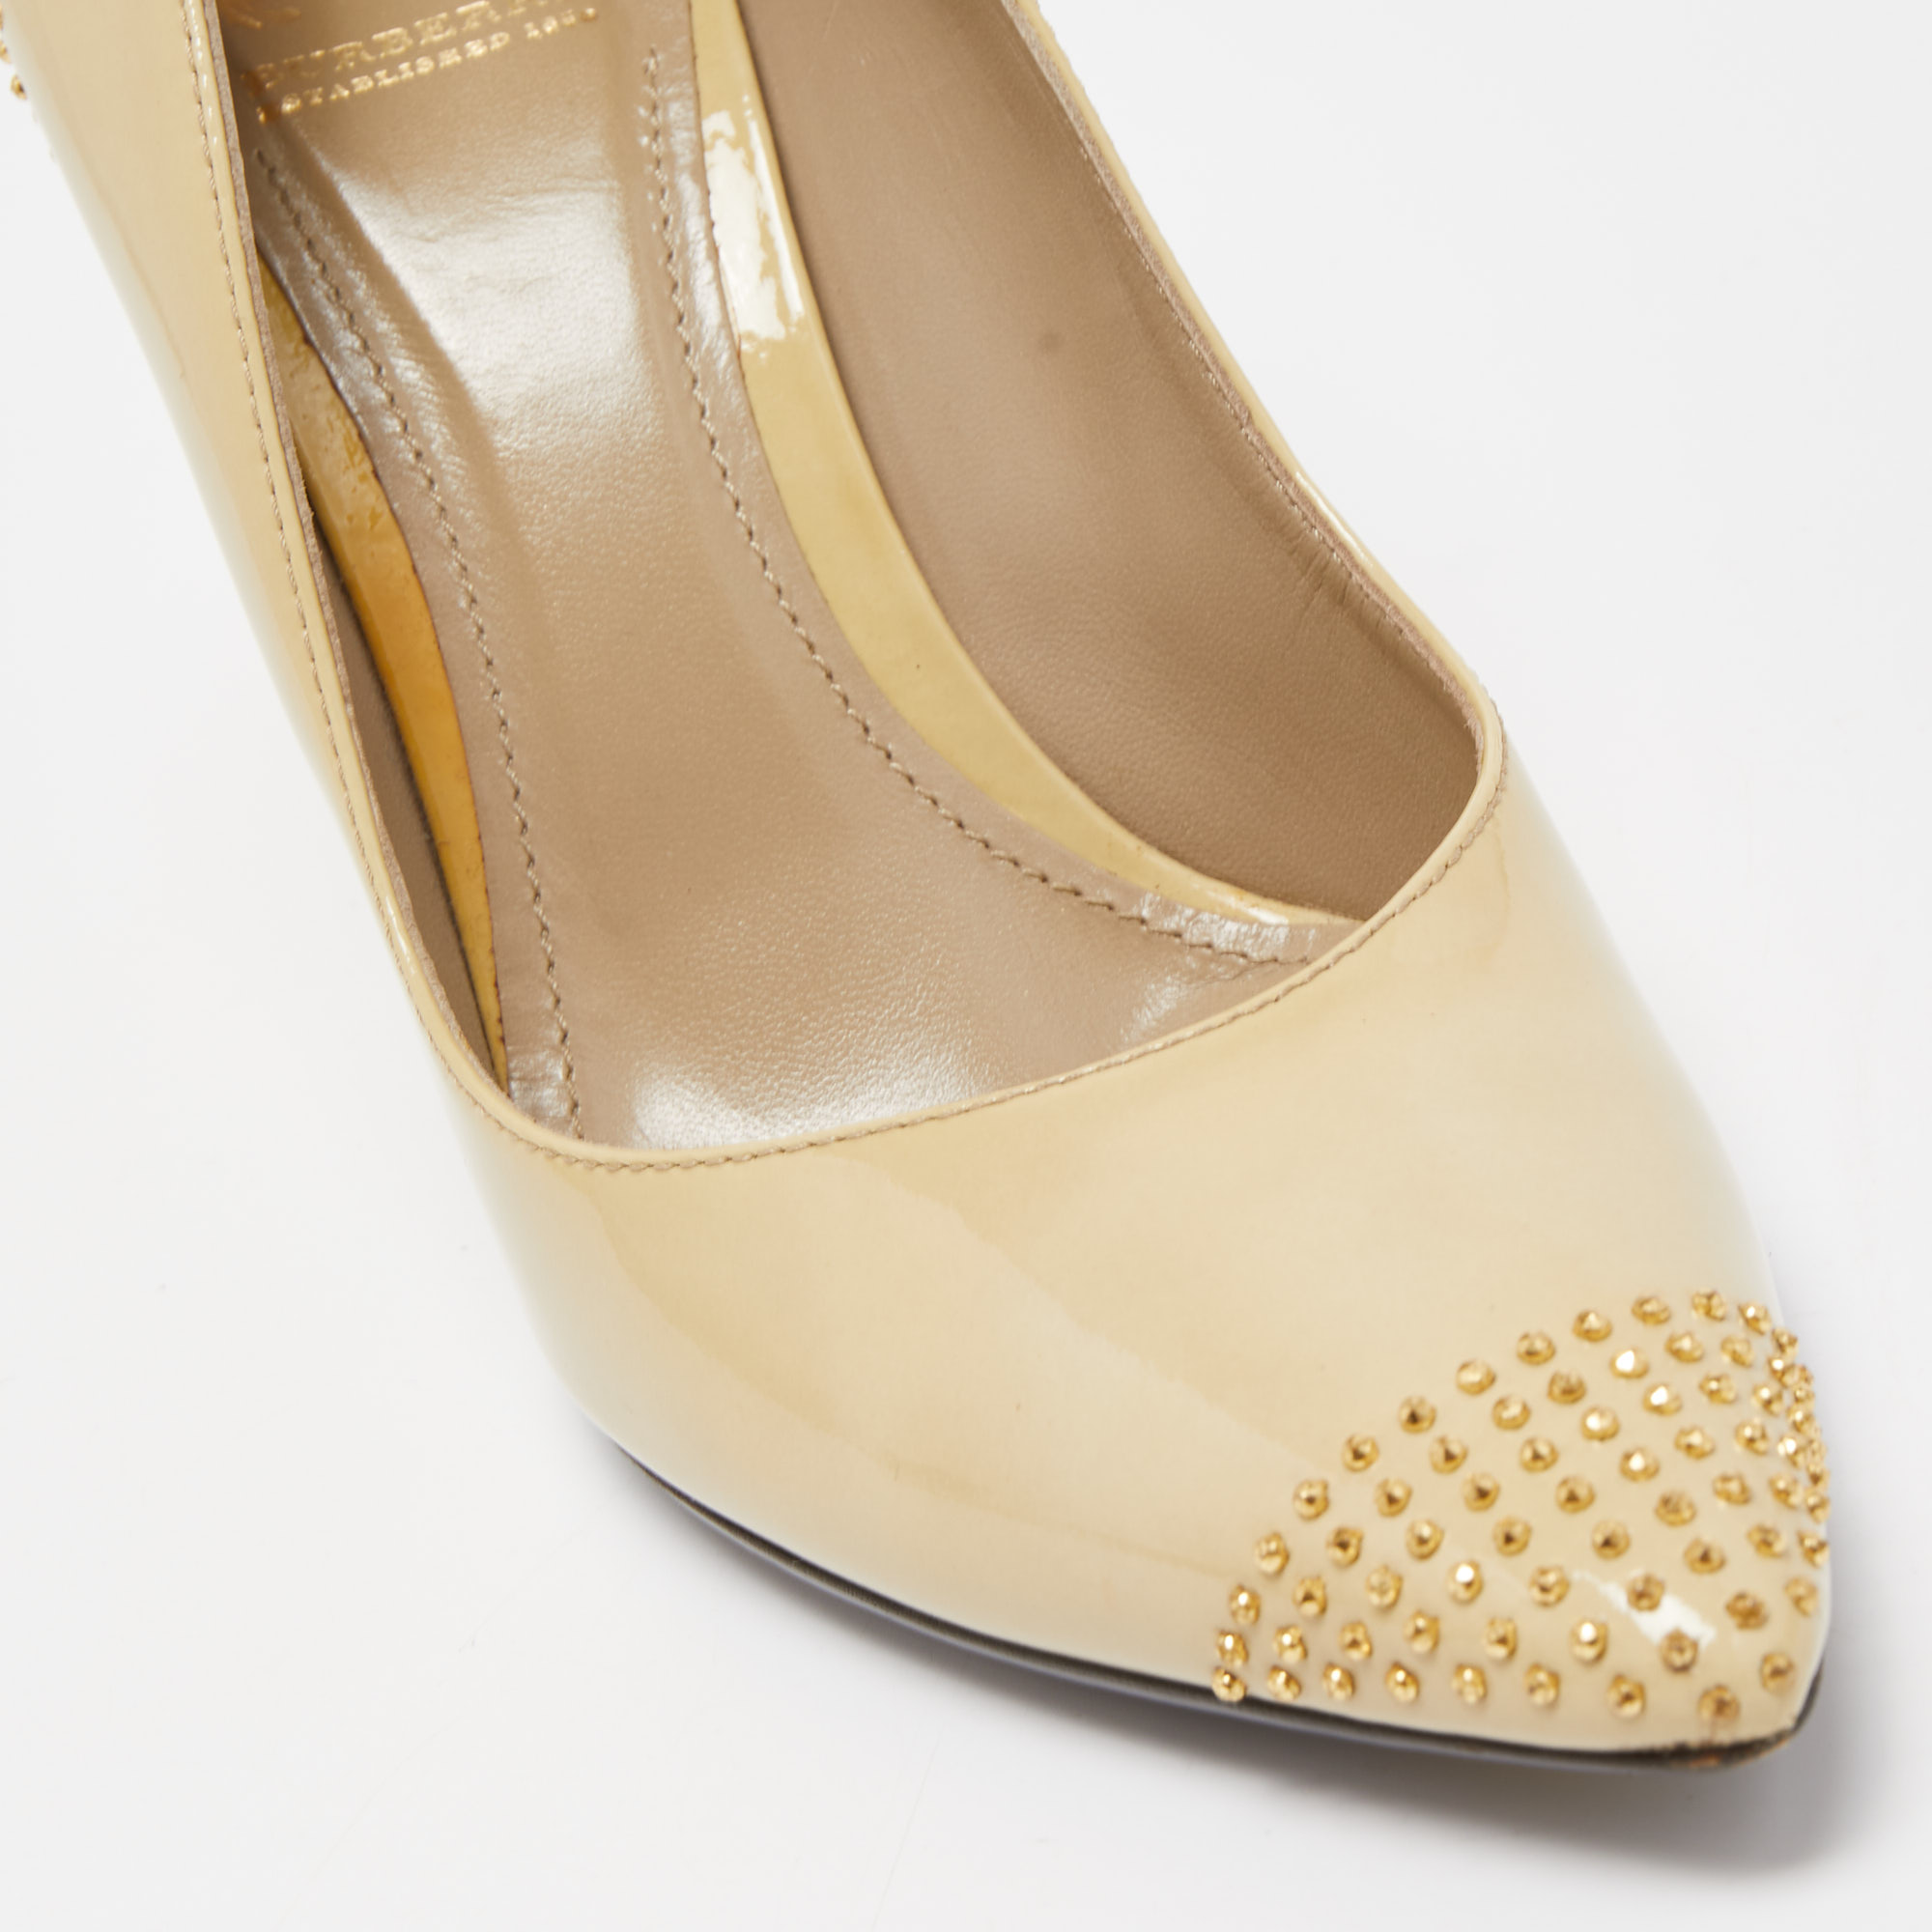 Burberry Beige Patent Leather Studded Pointed Toe Pumps Size 38